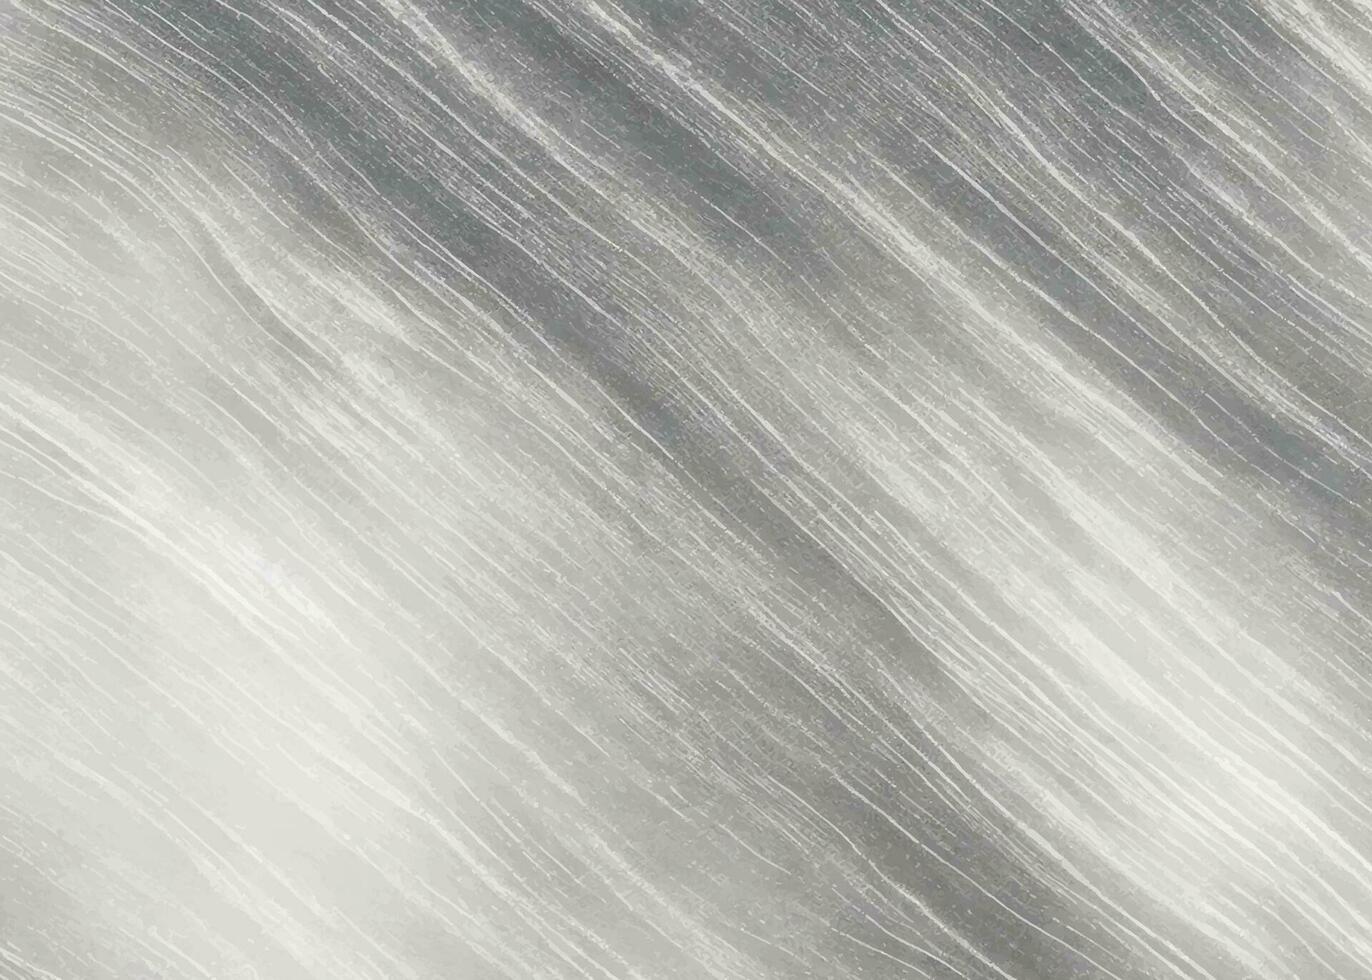 Silver Black Foil Texture Background Stock Photo - Download Image